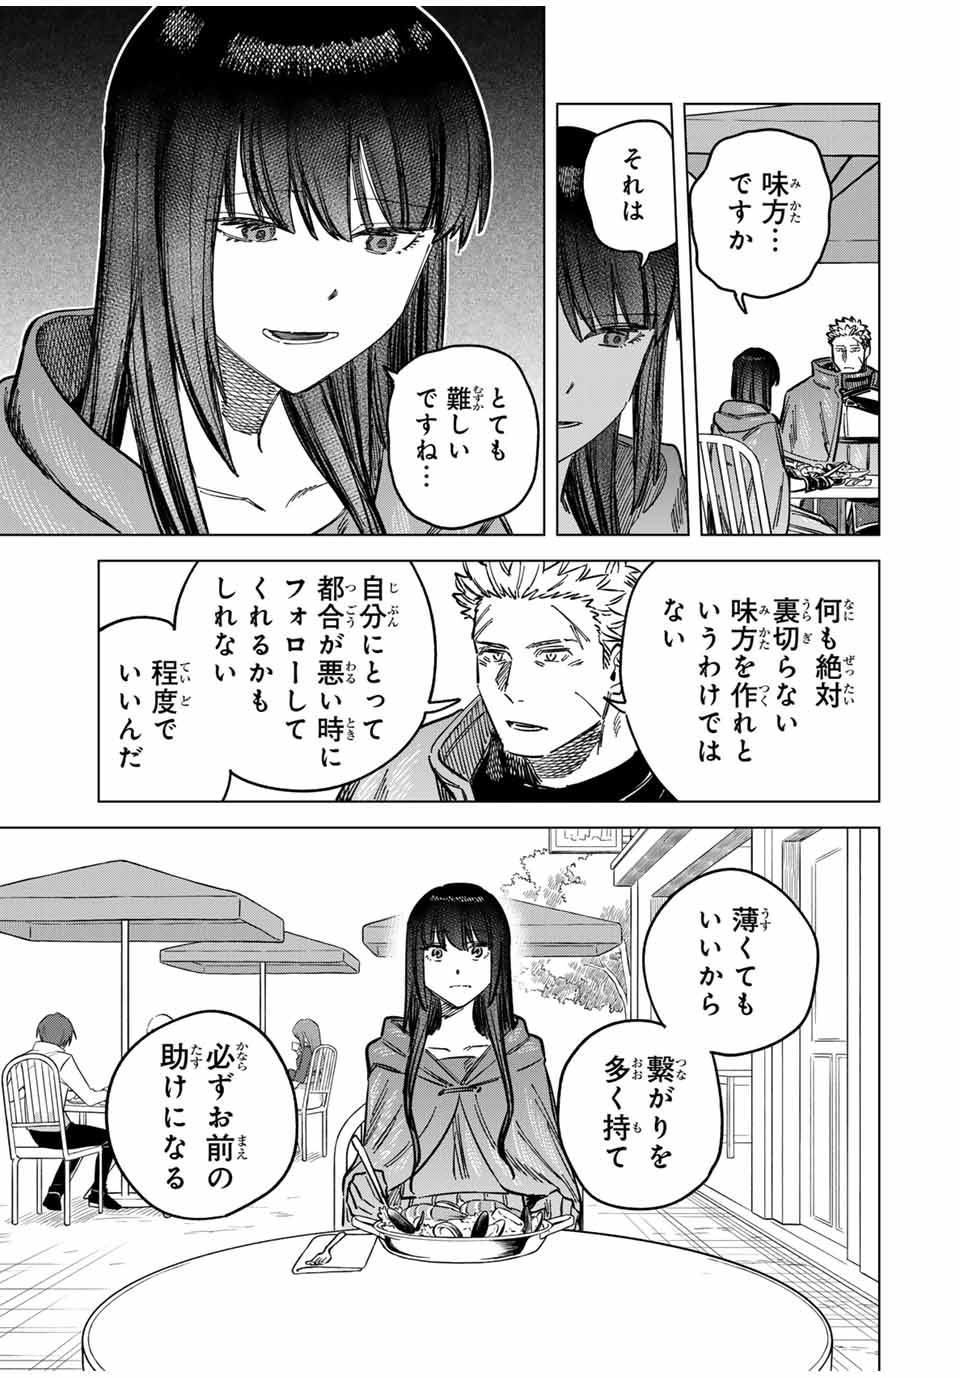 Witch and Mercenary 魔女と傭兵 第6話 - Page 15